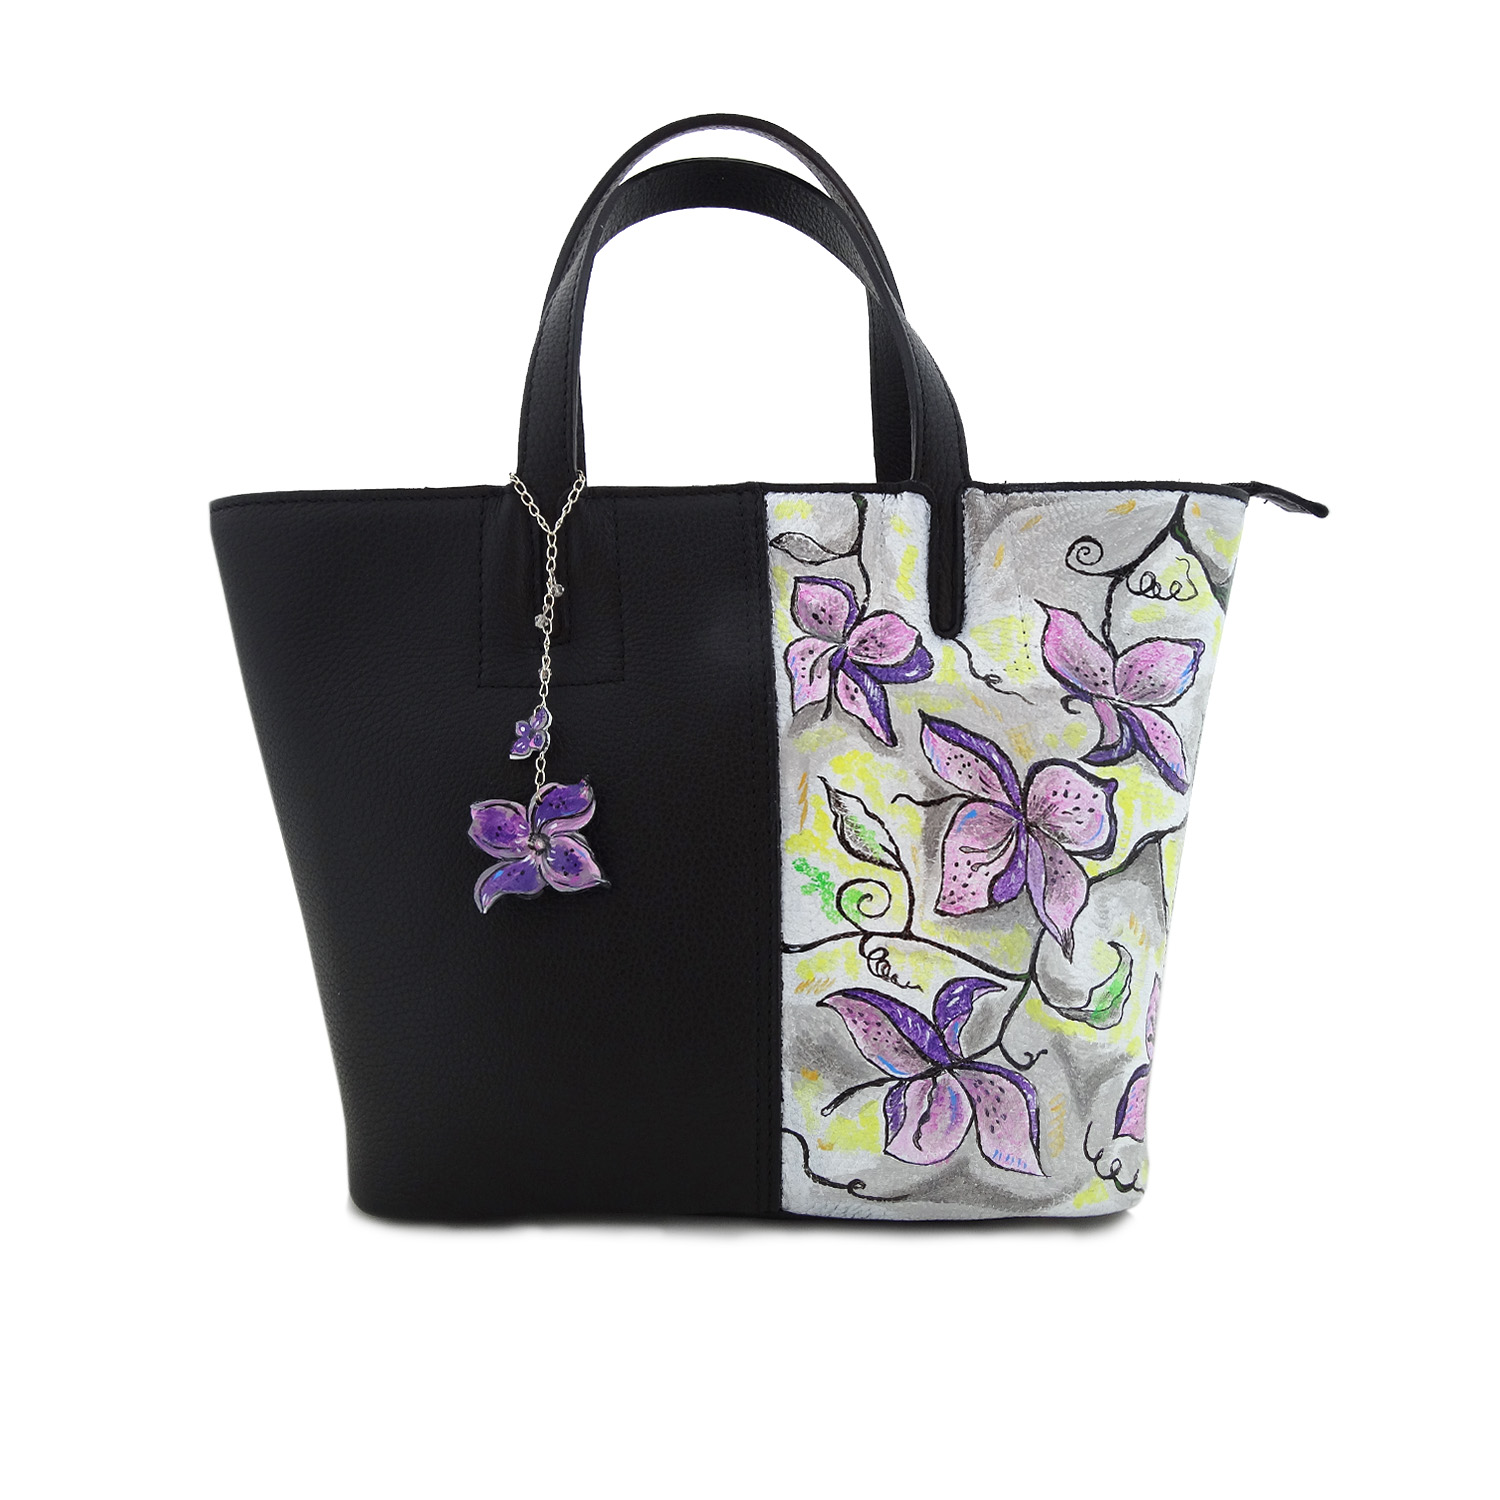 Hand painted bag - Color flowers